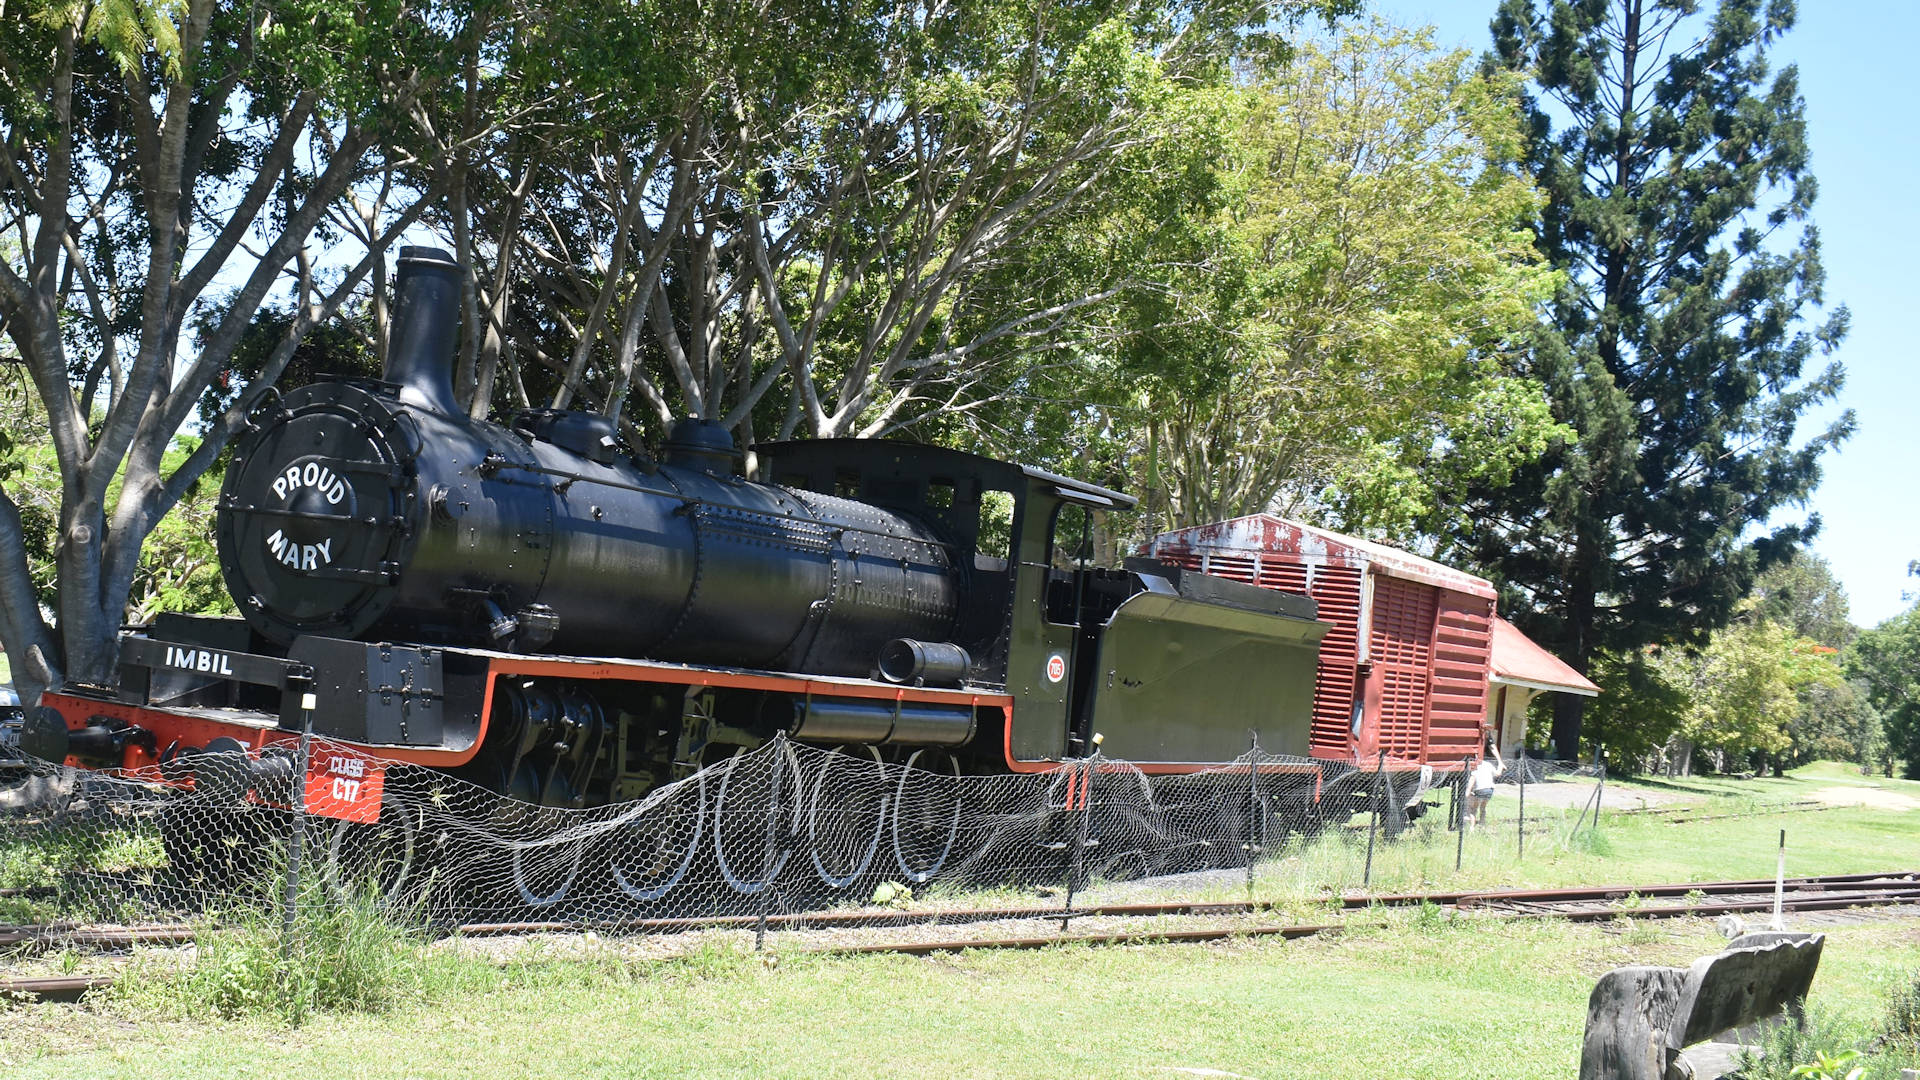 Proud Mary, steam locomotive located at the Rail Trail park in Imbil